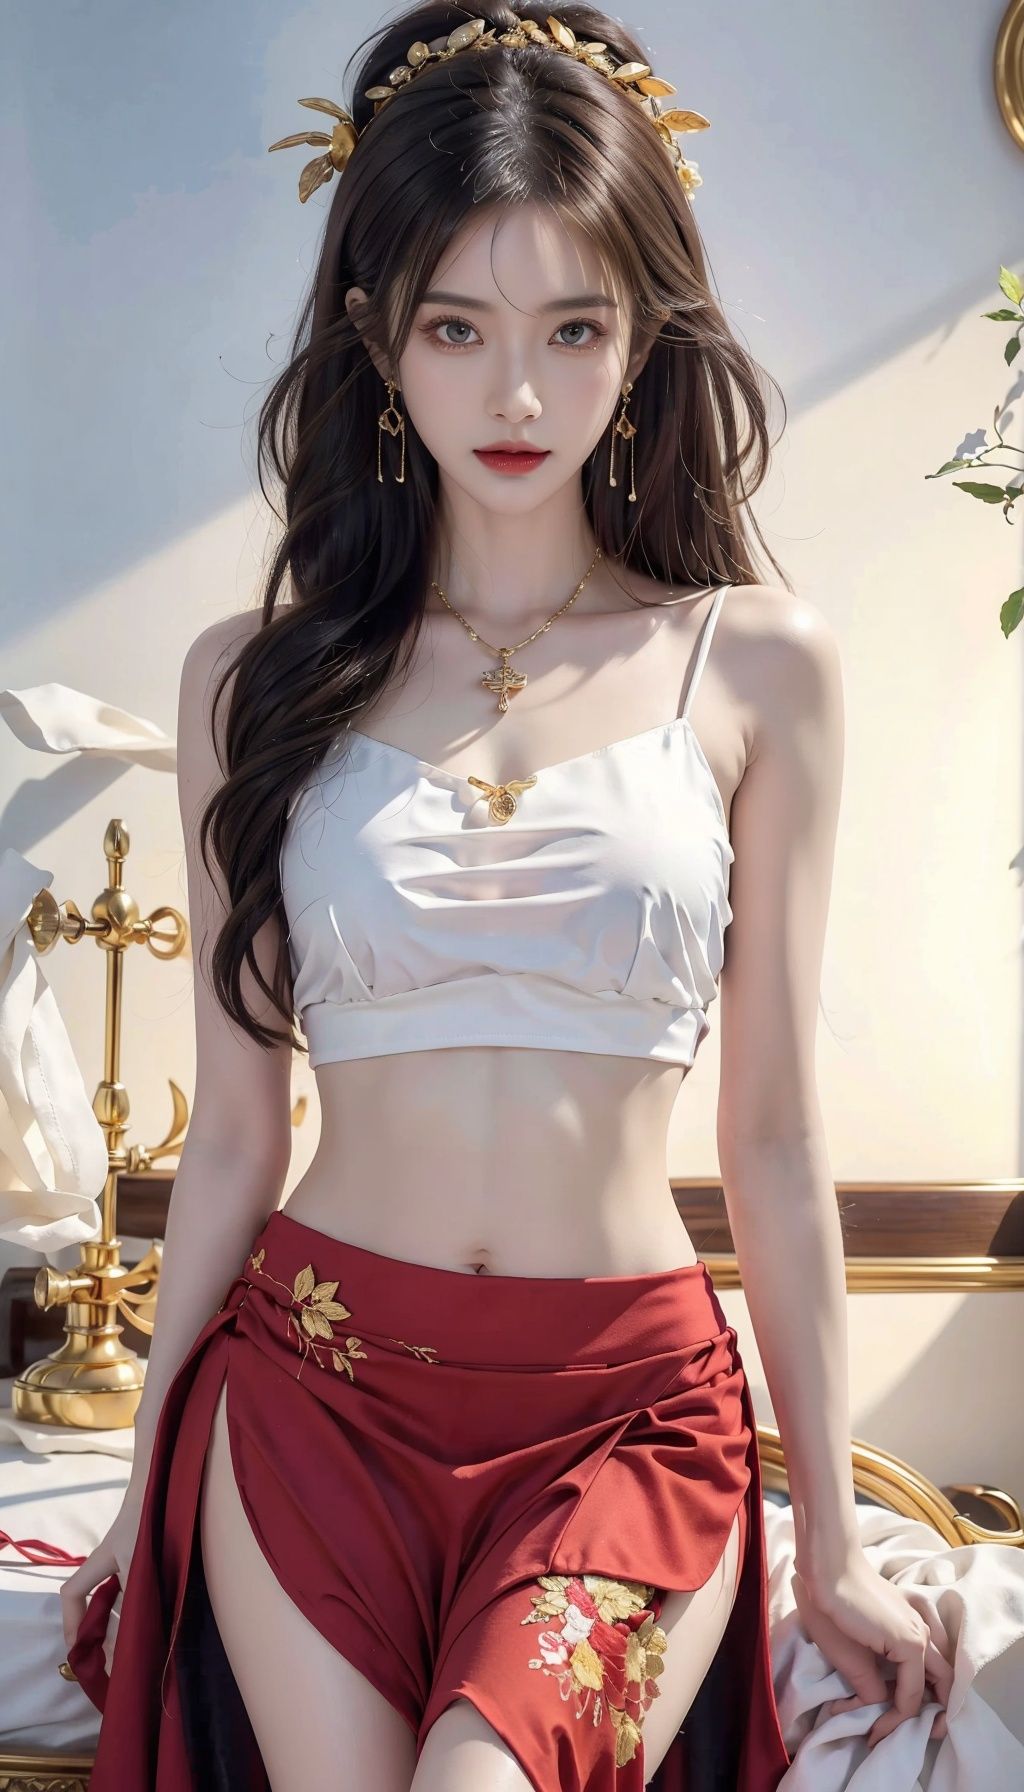 High quality, masterpiece, 1 girl, golden headdress, long hair, red scarf, ponytail, earrings, necklace, camisole, red skirt, embroidery, exposed legs, navel,golden light, gufeng, wangyushan